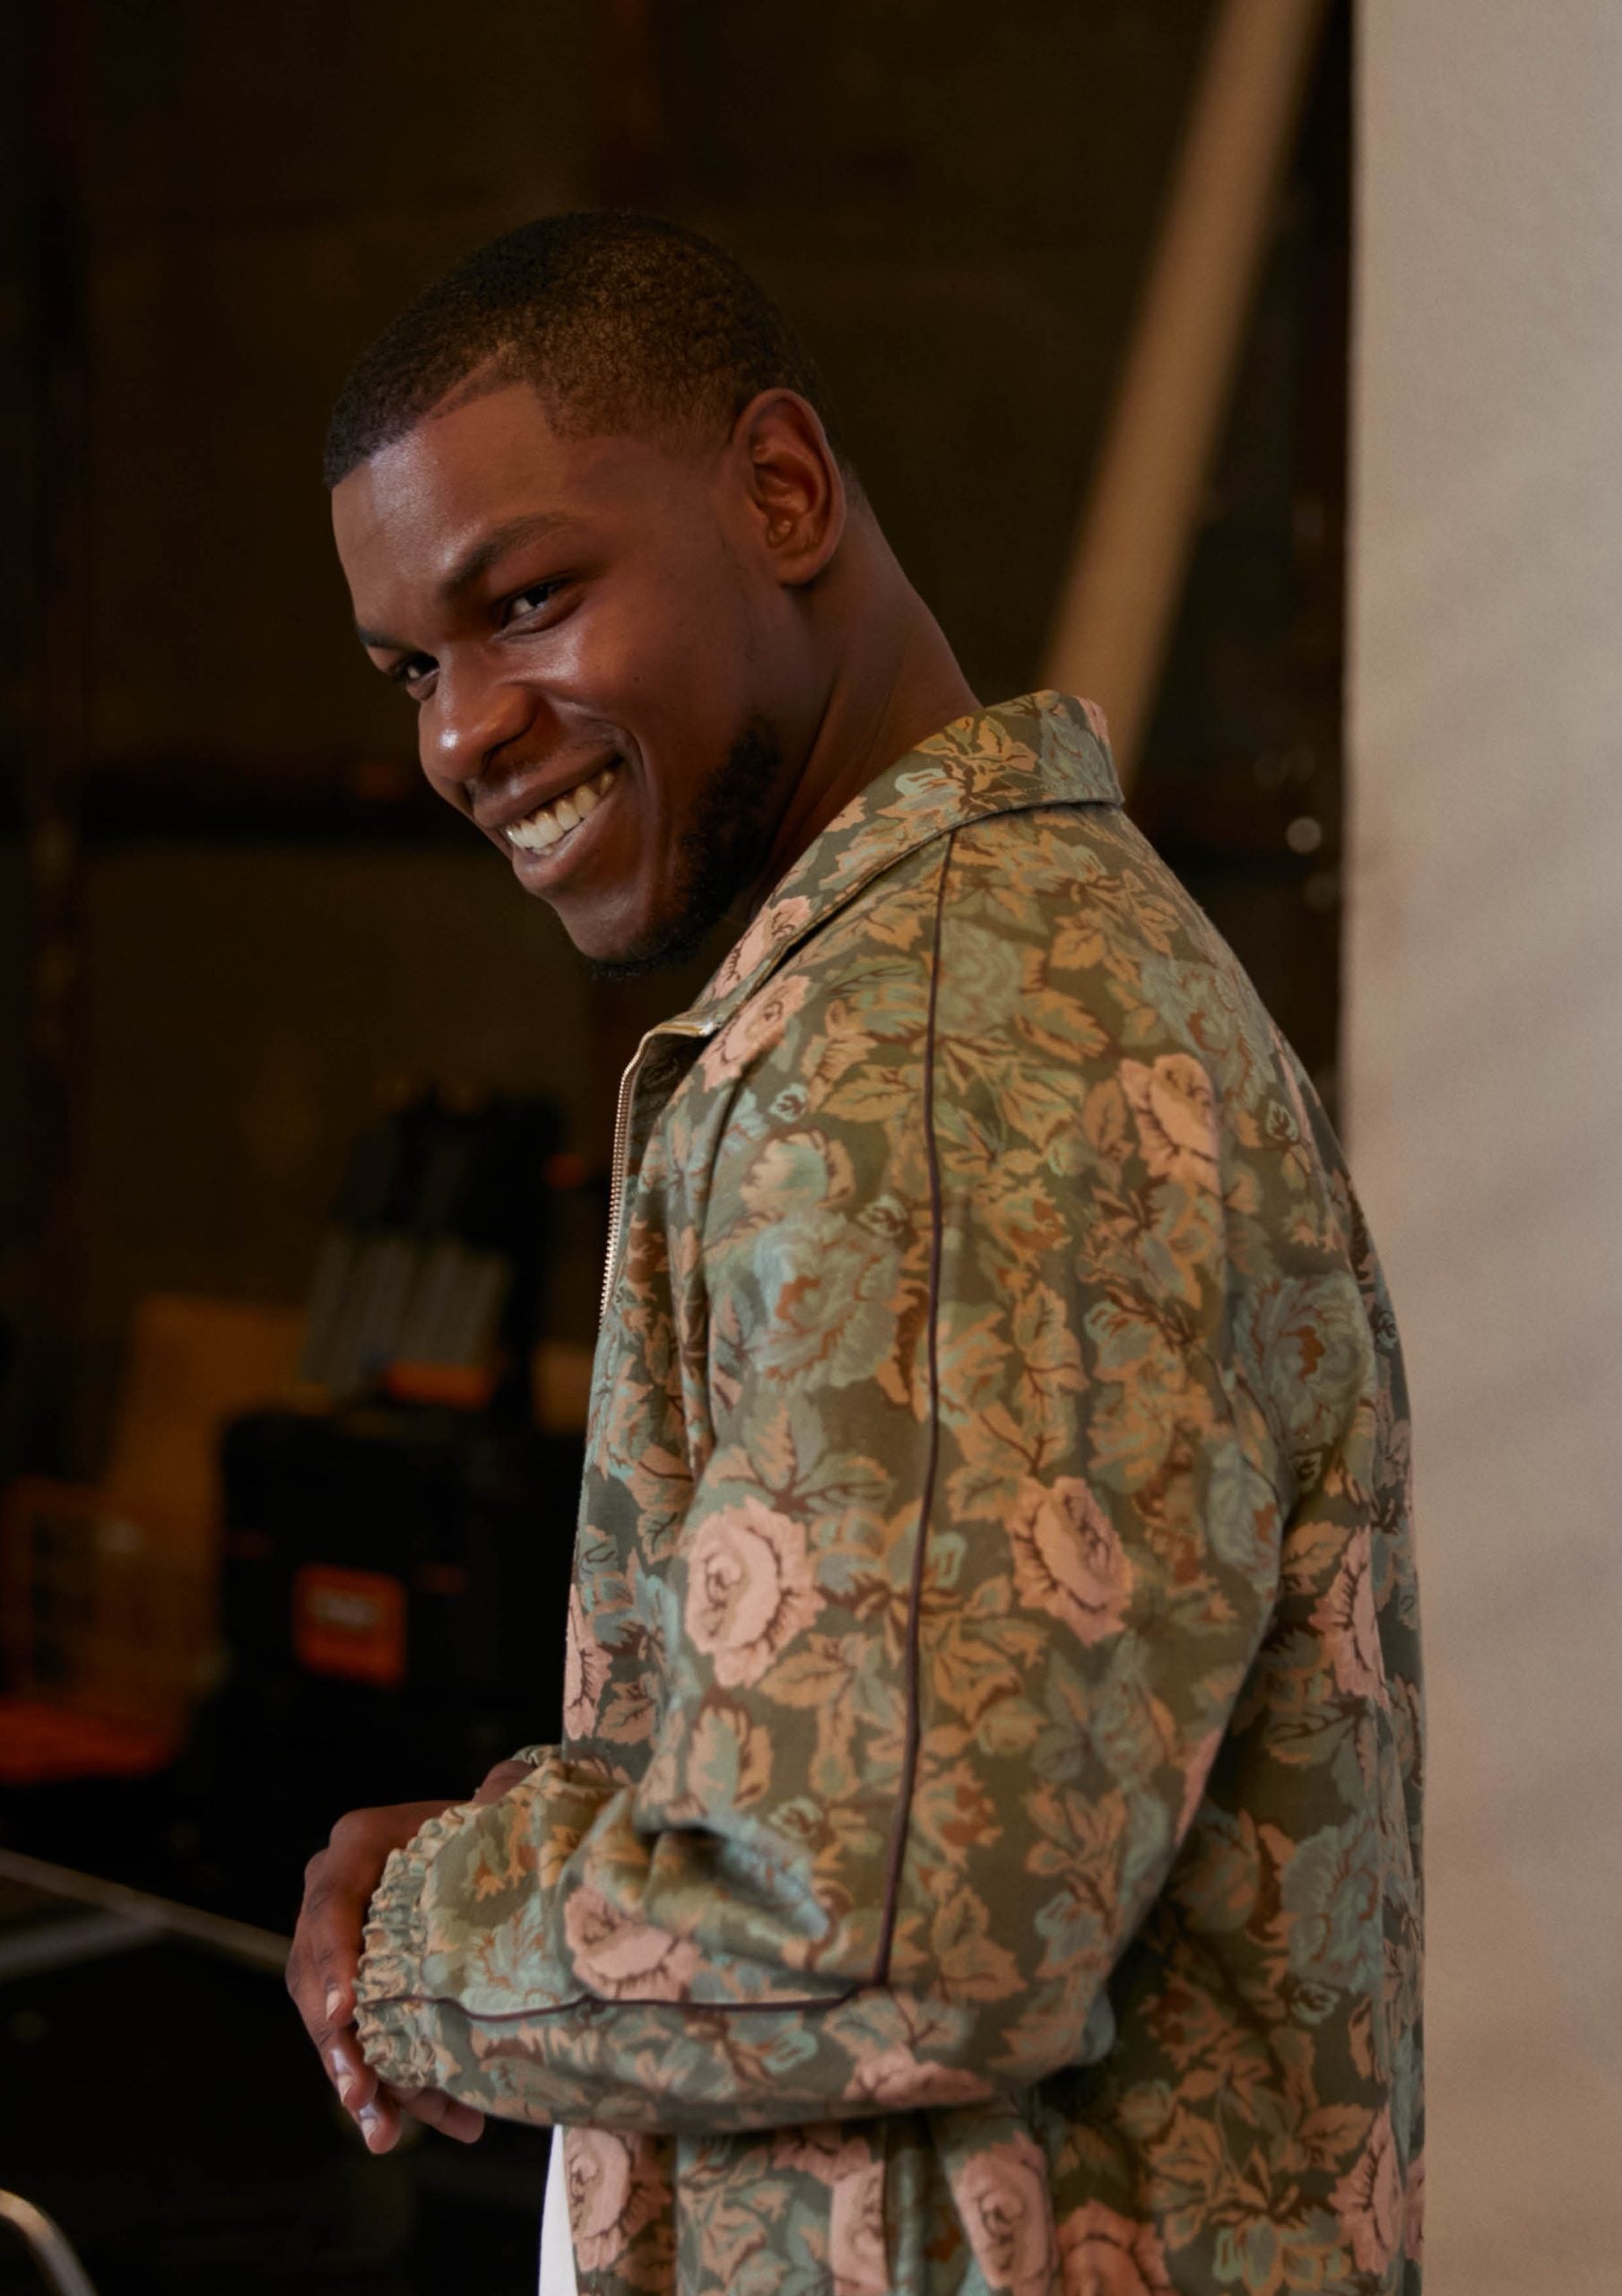 H&M Teams Up With John Boyega To Create A More Sustainable Future